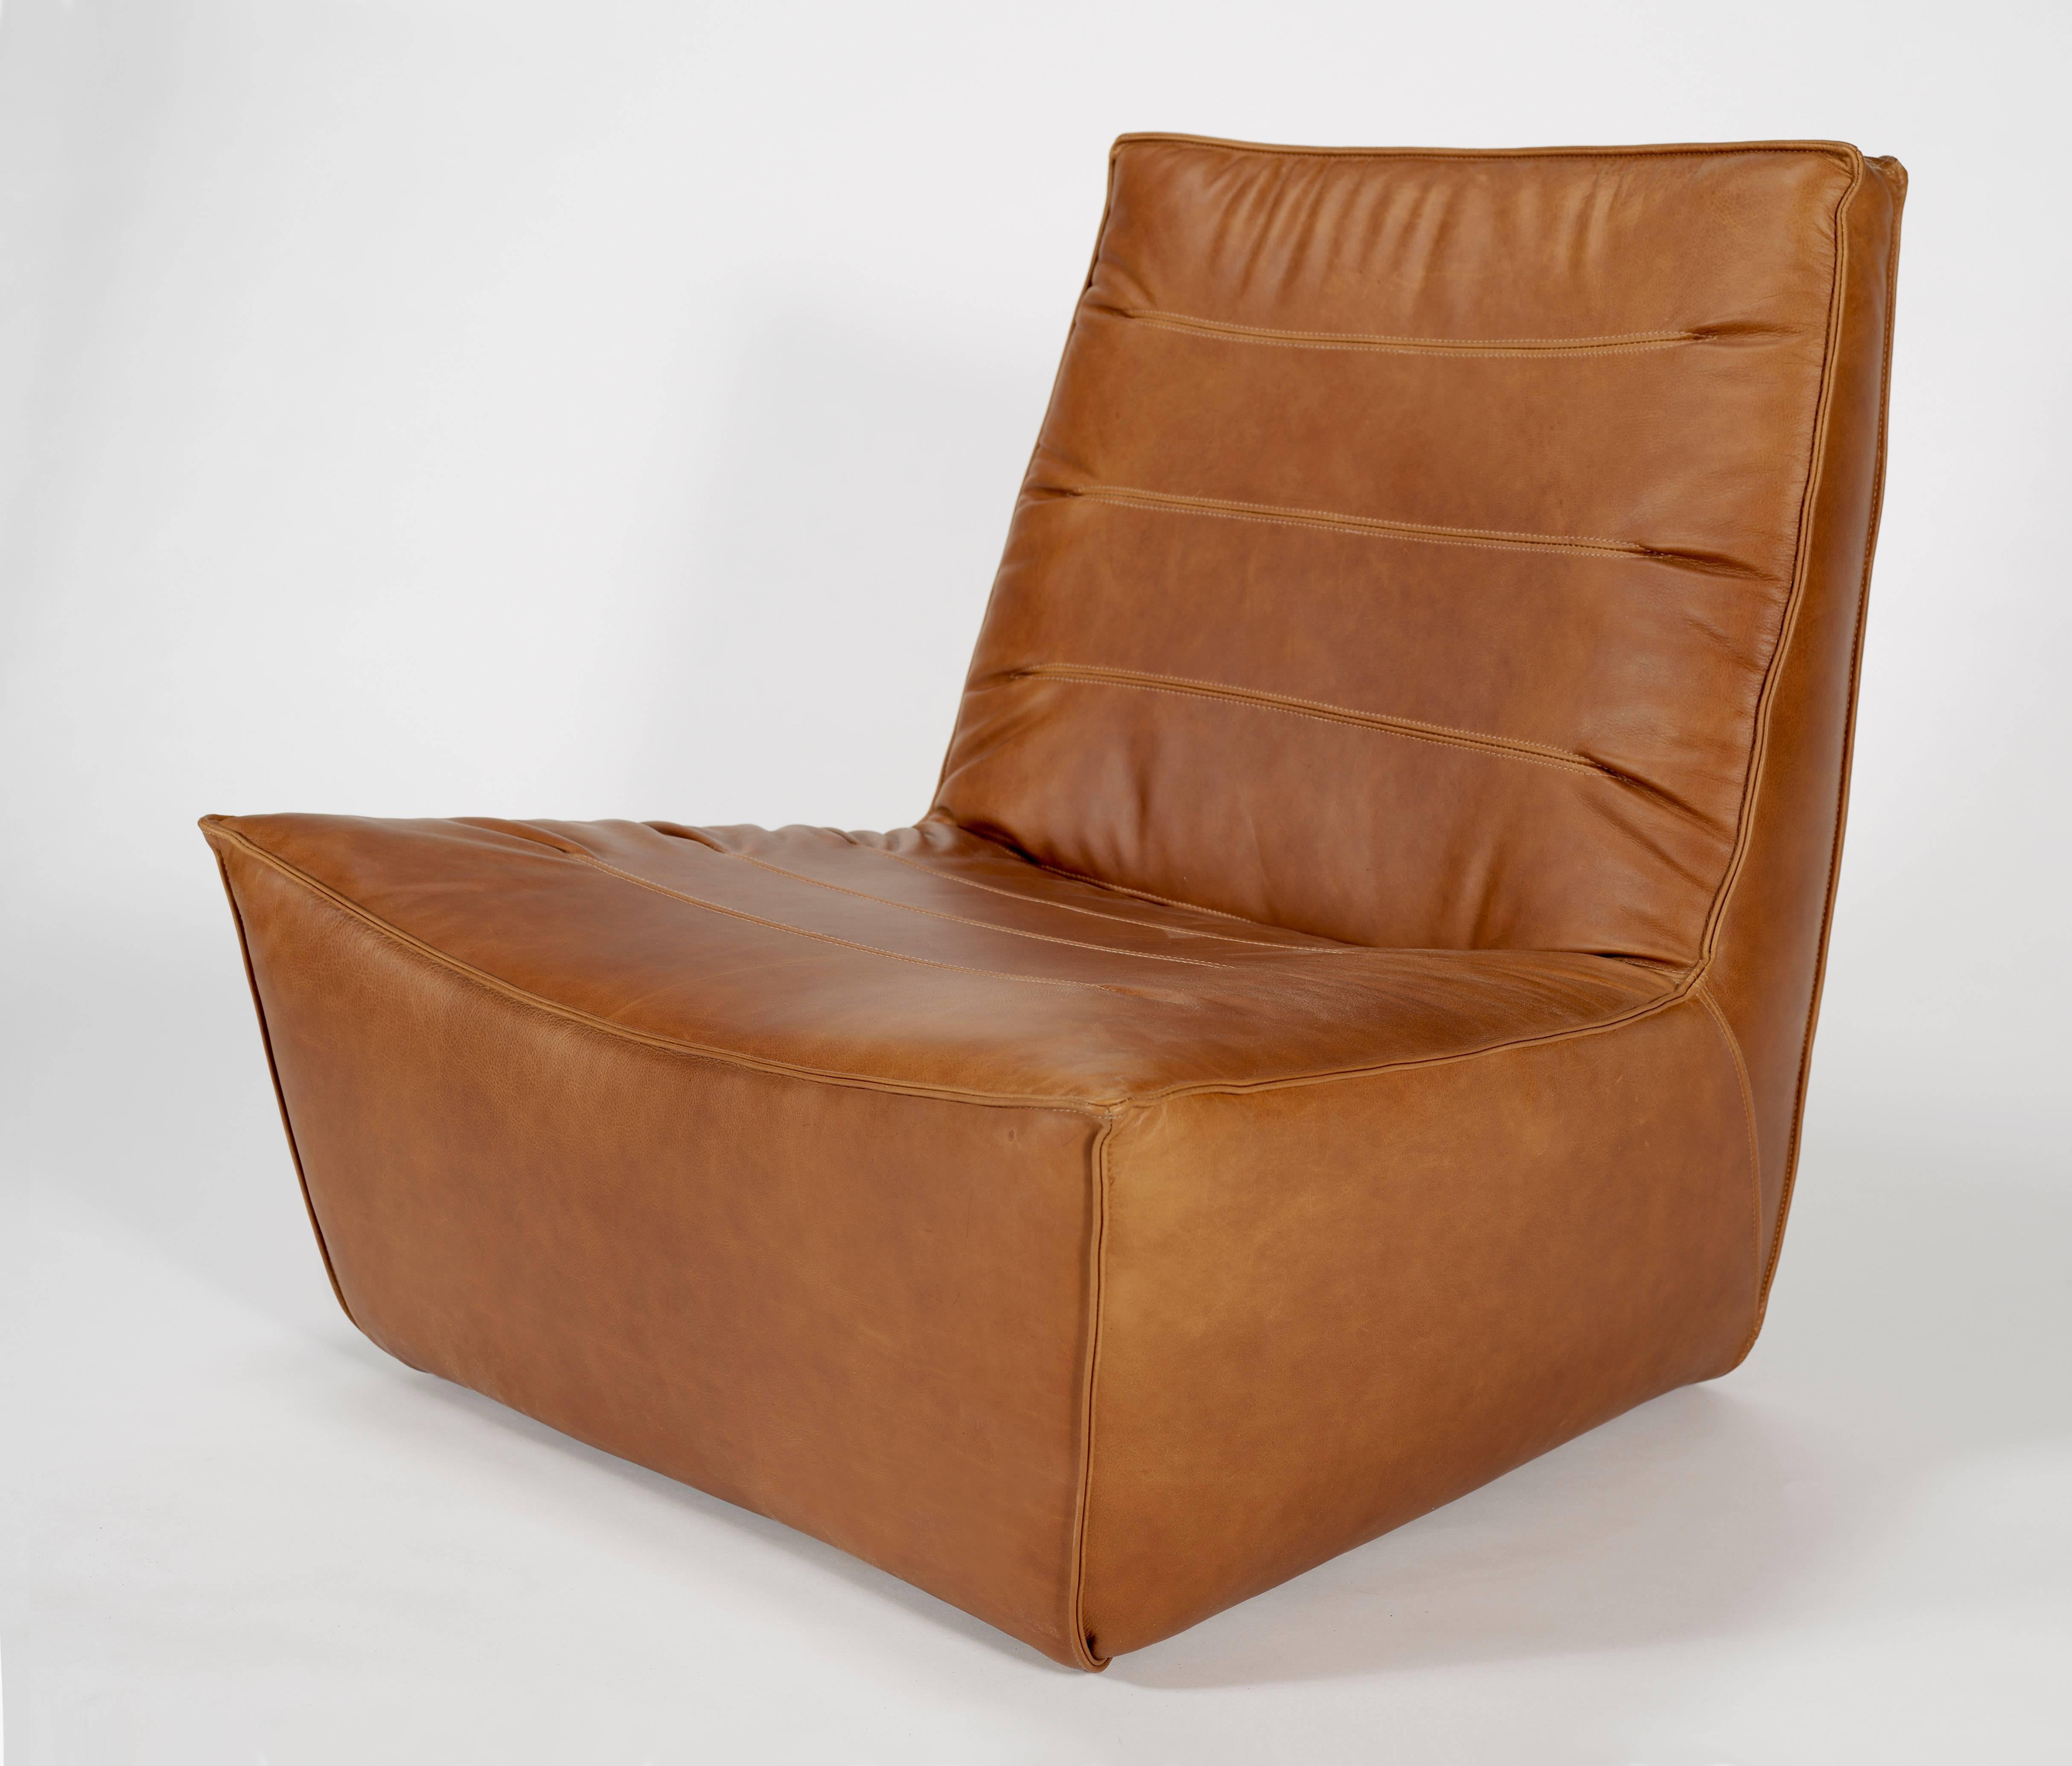 100xbtr Contemporary Pinch Lounge Chair in Whiskey Leather In New Condition For Sale In South Pasadena, CA